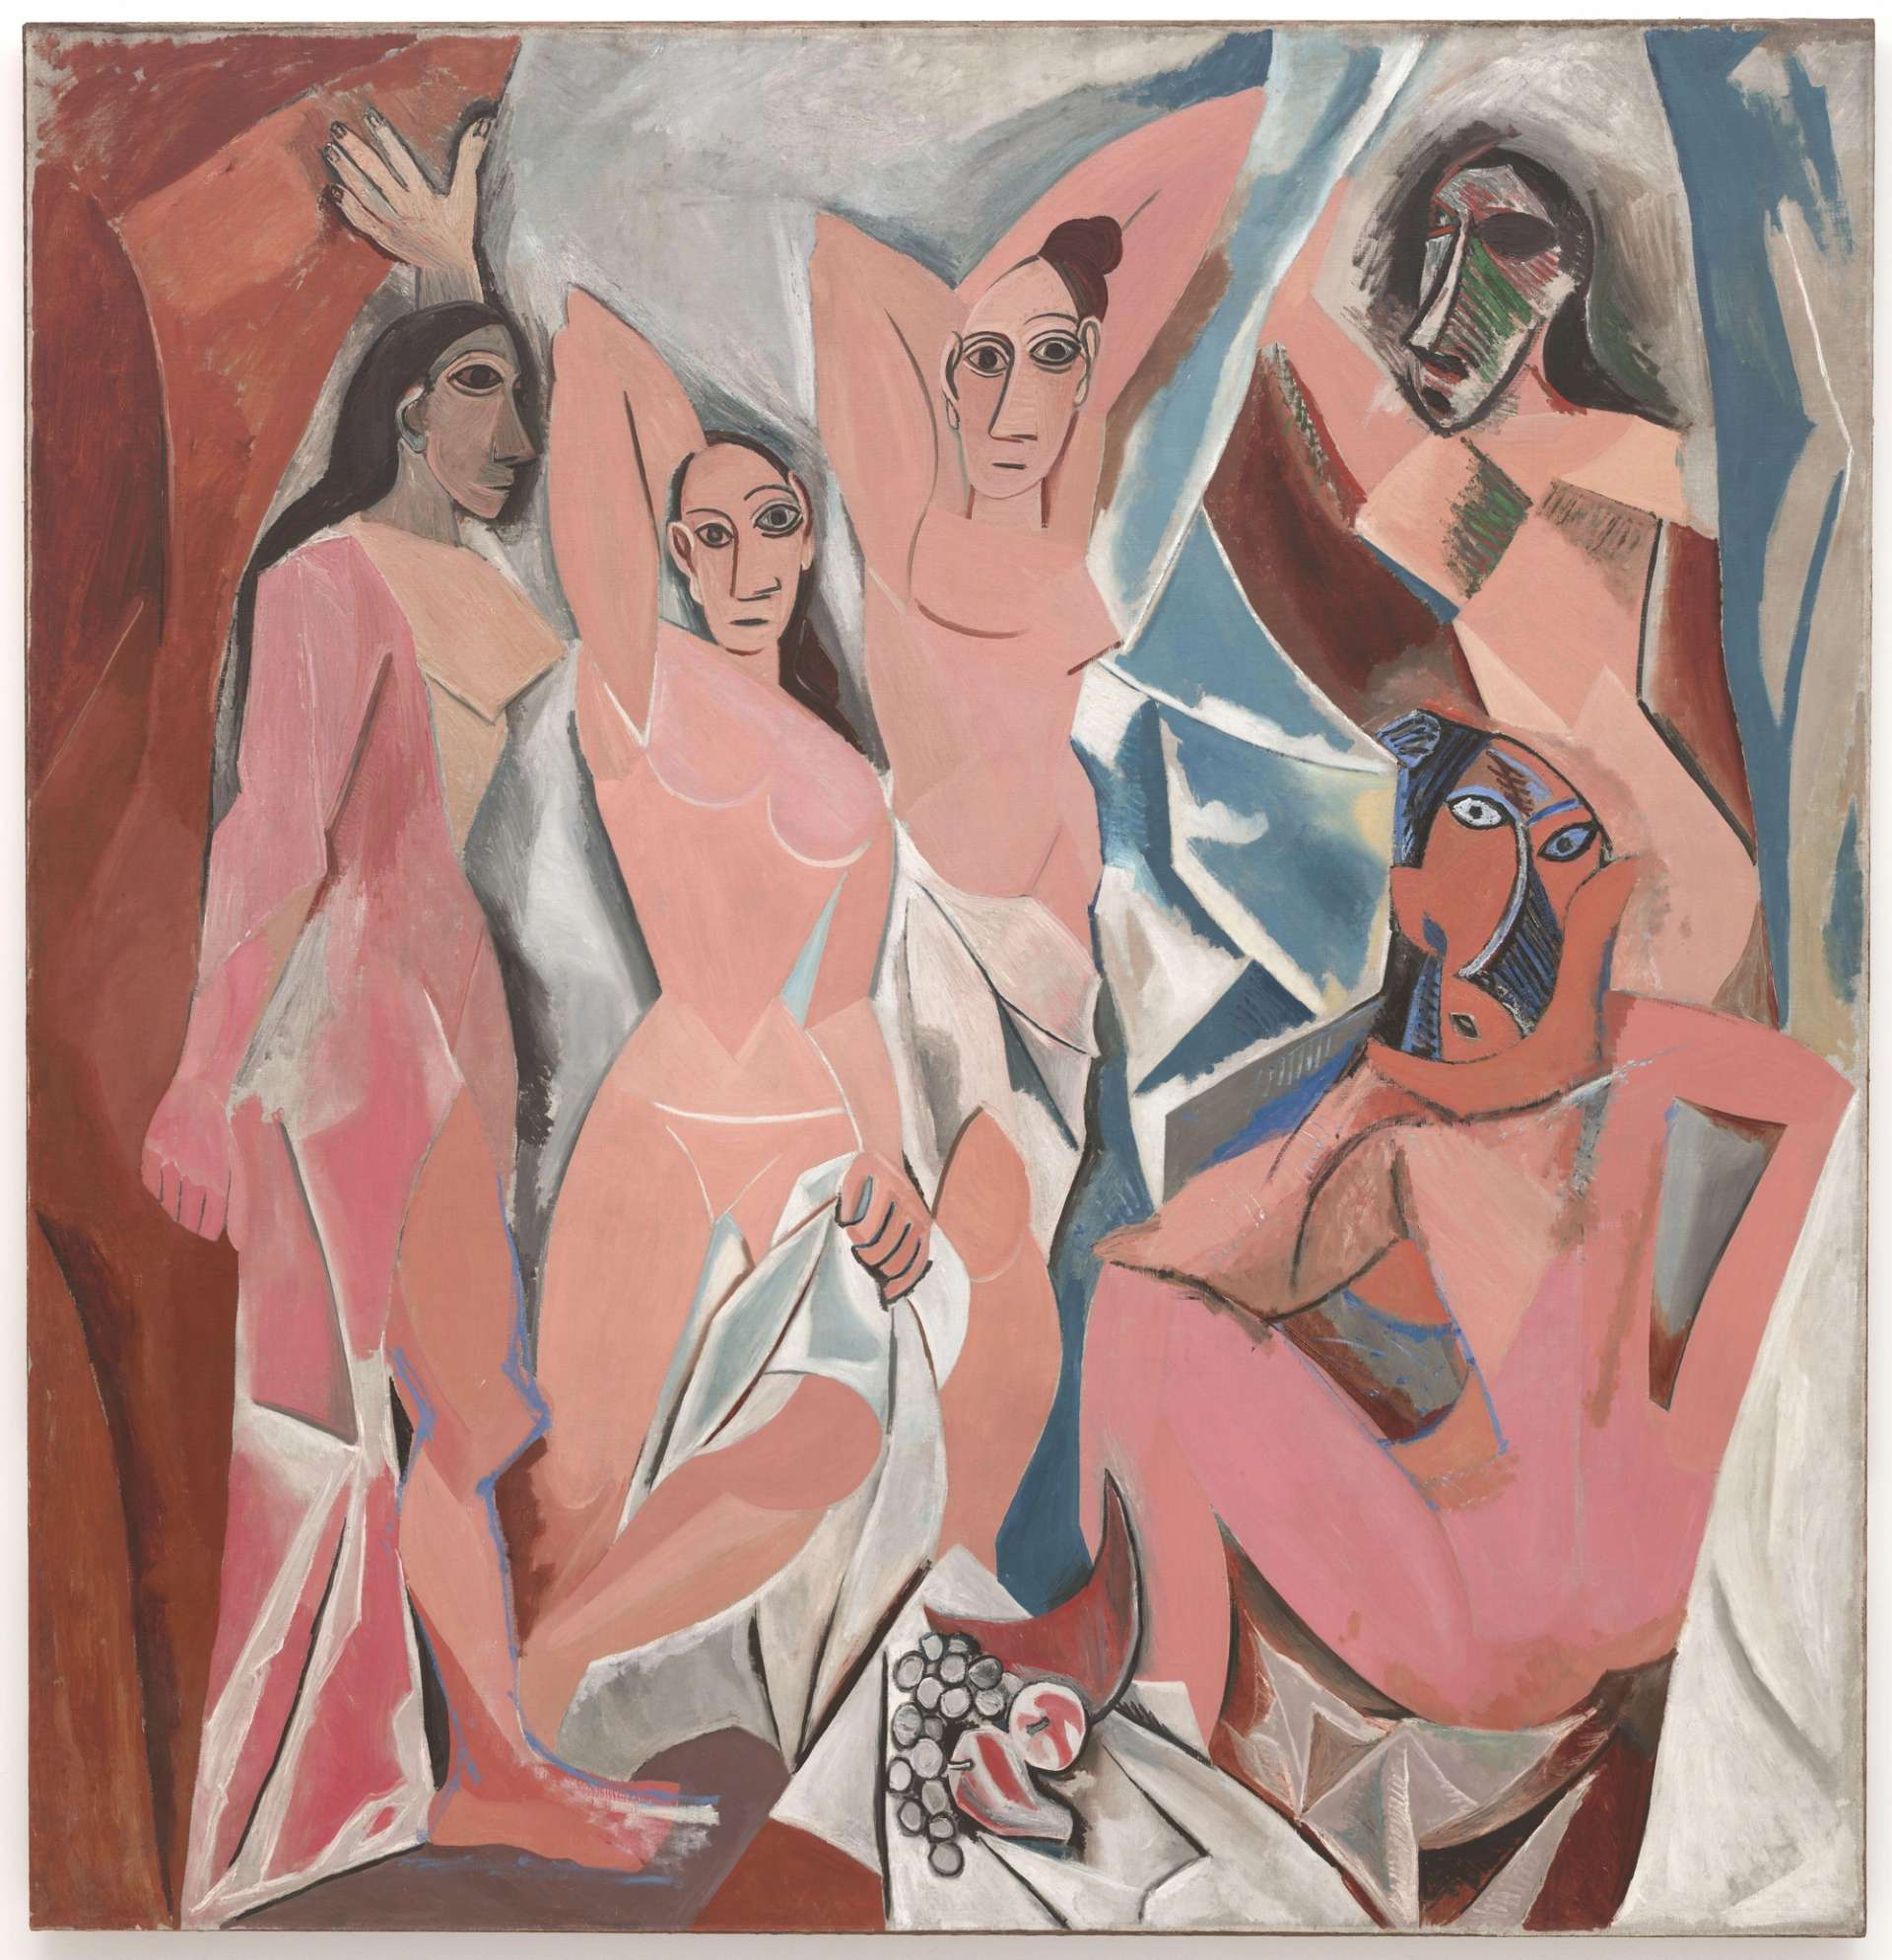 Cubist composition of five women painted in hues of pink facing the viewer with backgrounds of muted red and blue